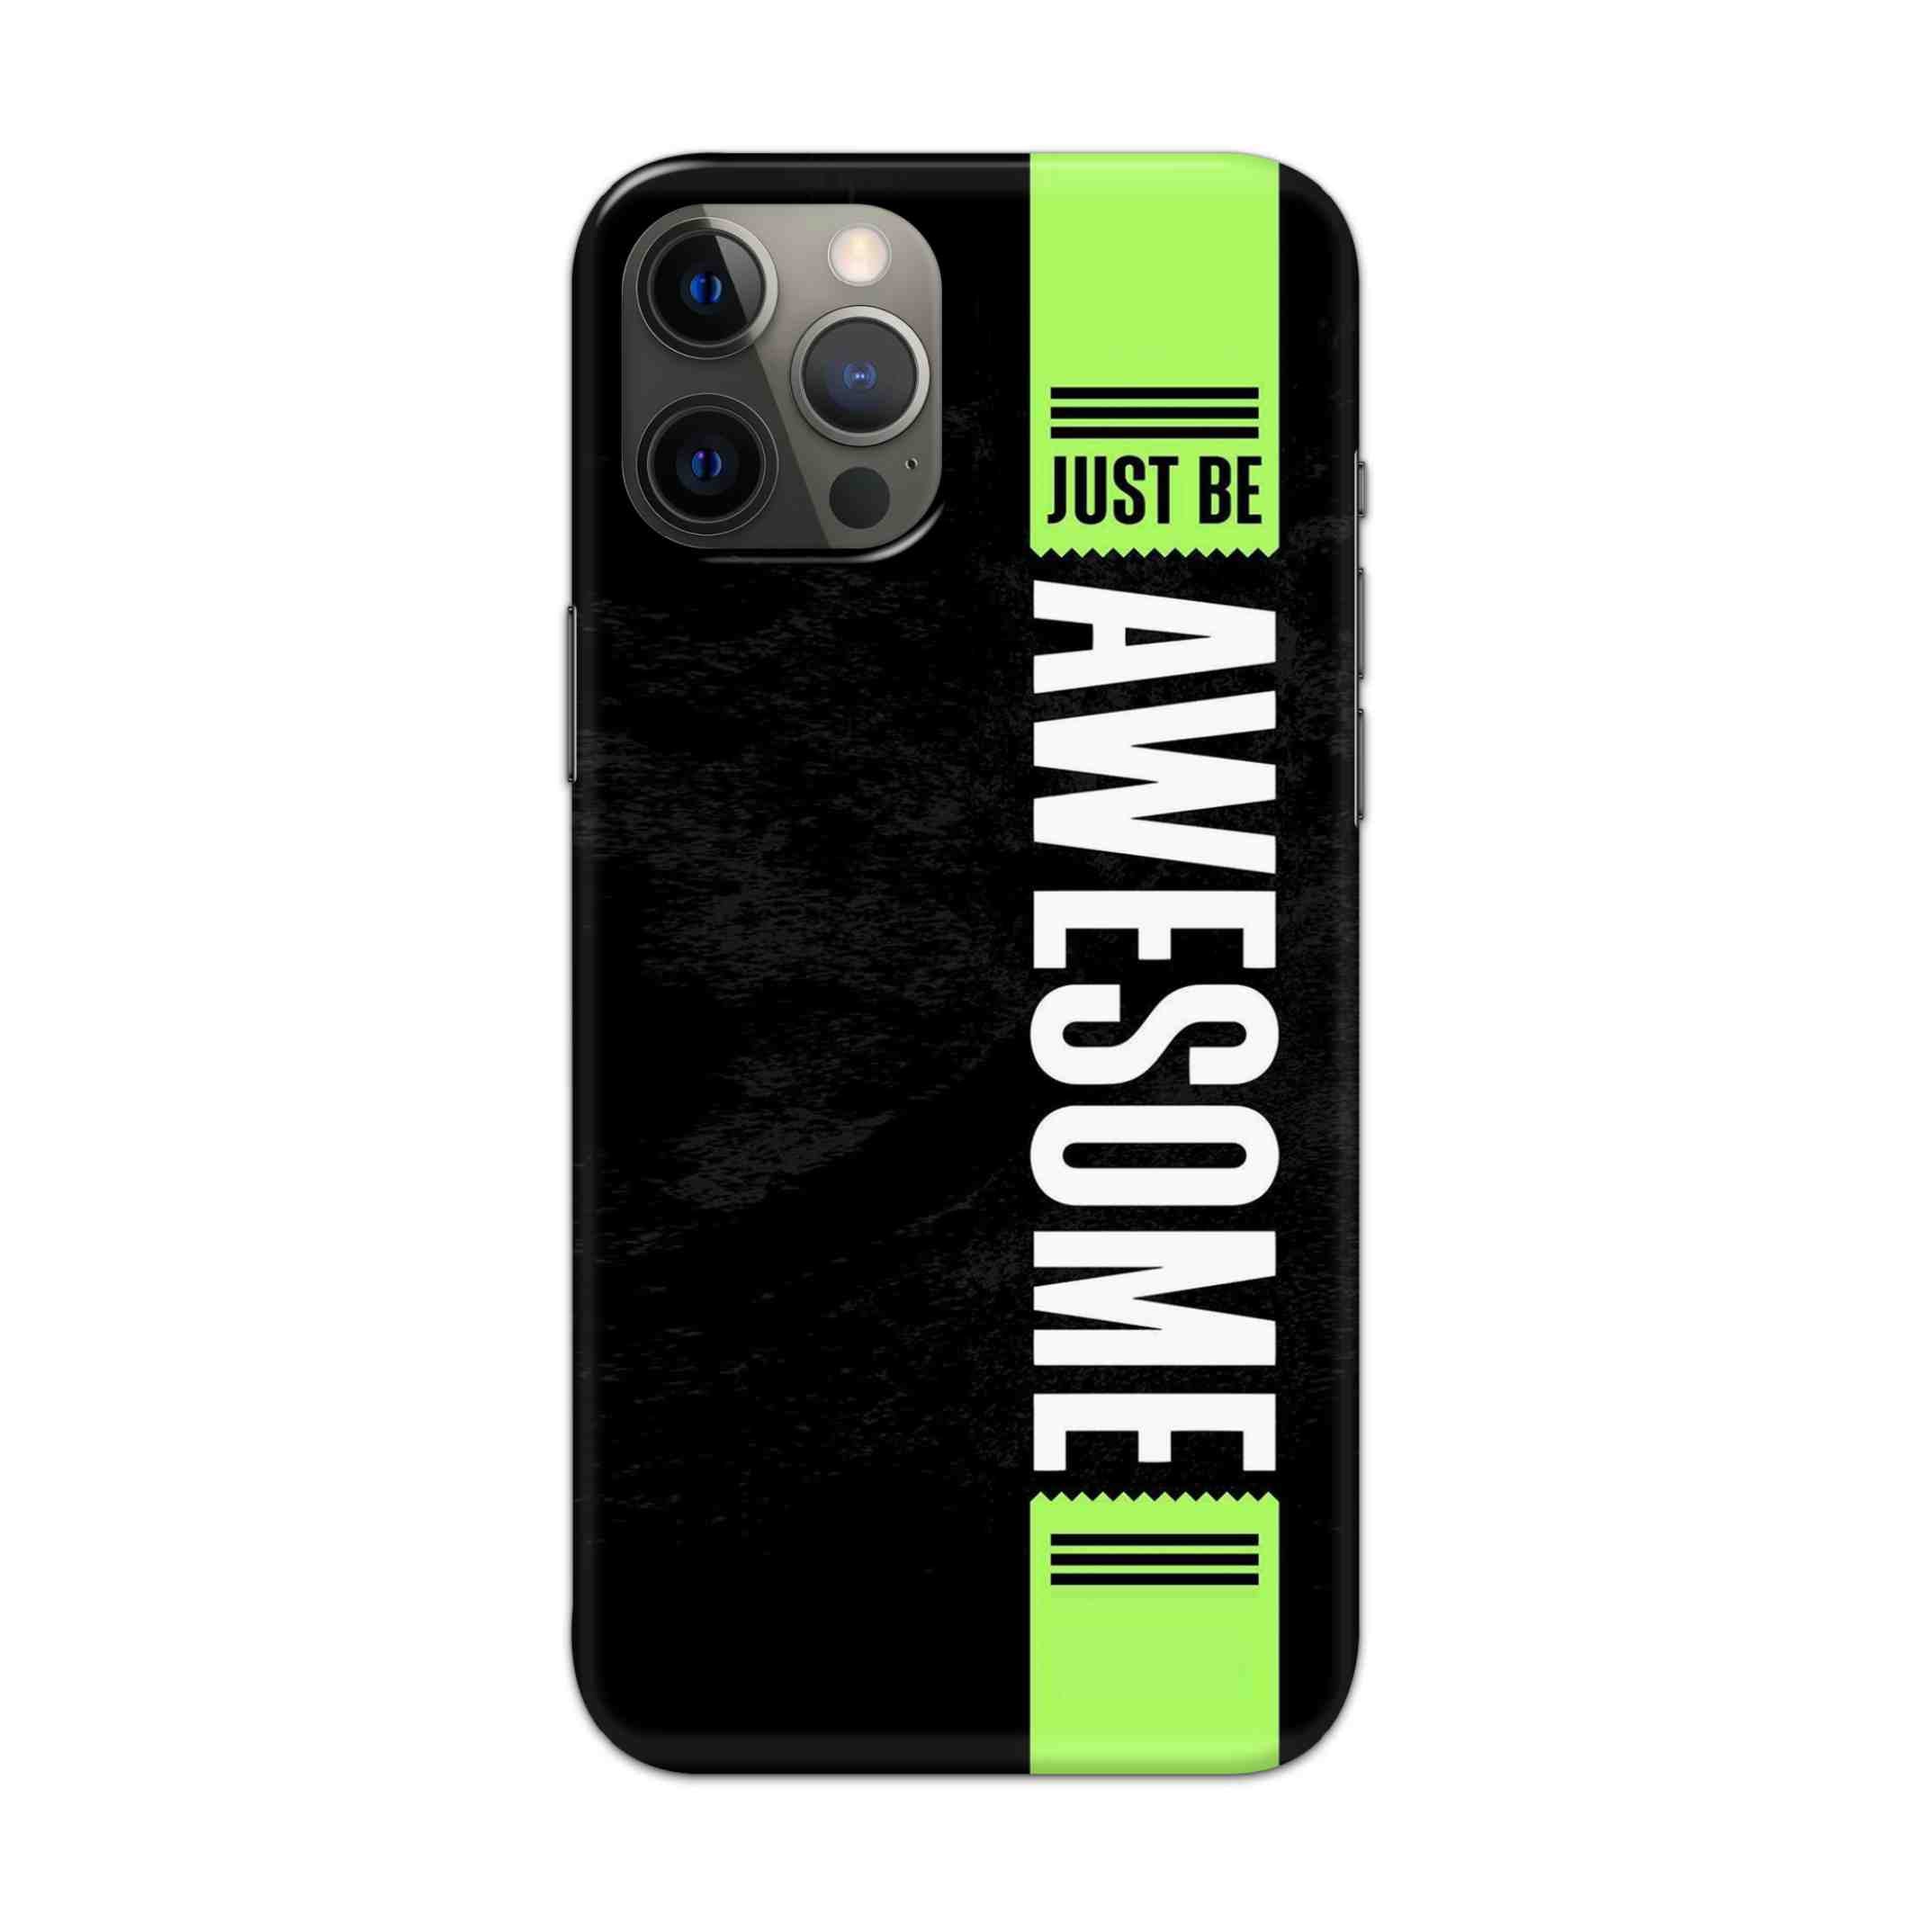 Buy Awesome Street Hard Back Mobile Phone Case/Cover For Apple iPhone 12 pro max Online